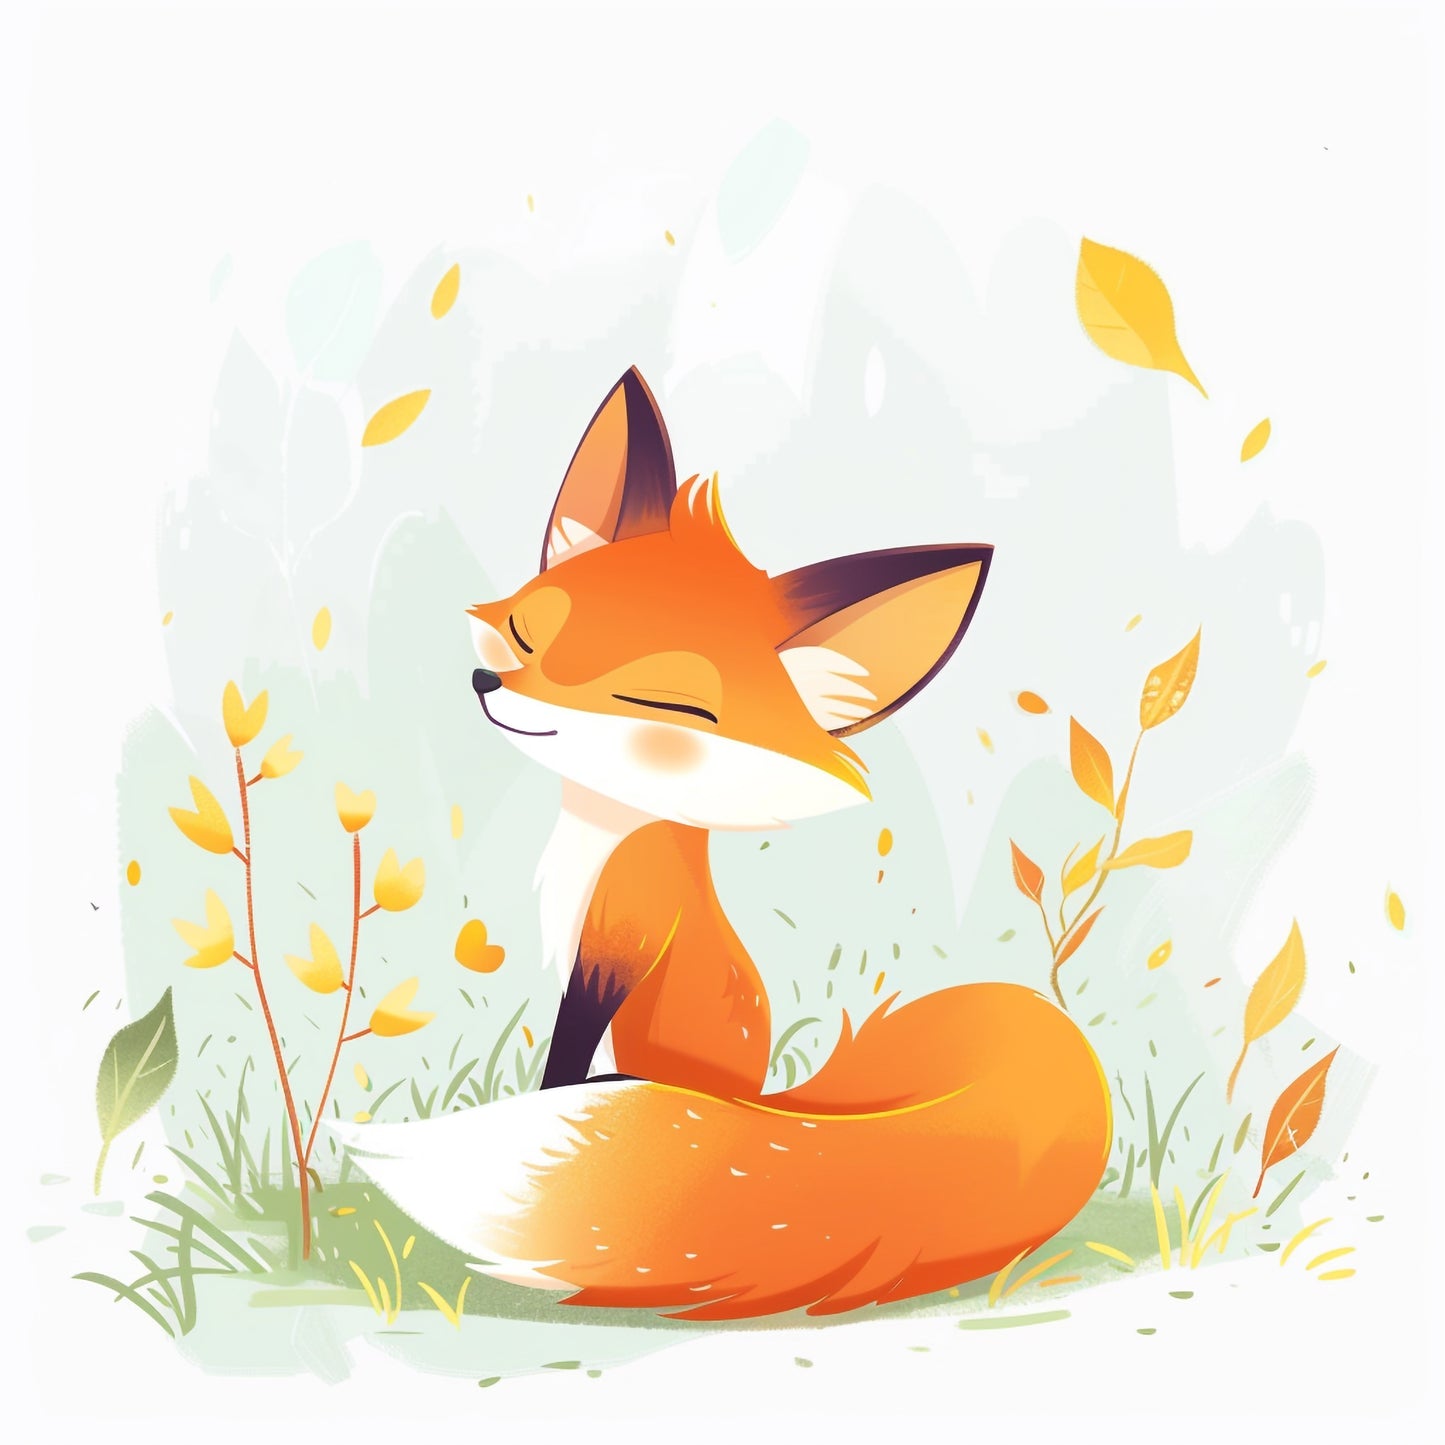 Dreamy Fox Illustration in a Pastel Nature Setting